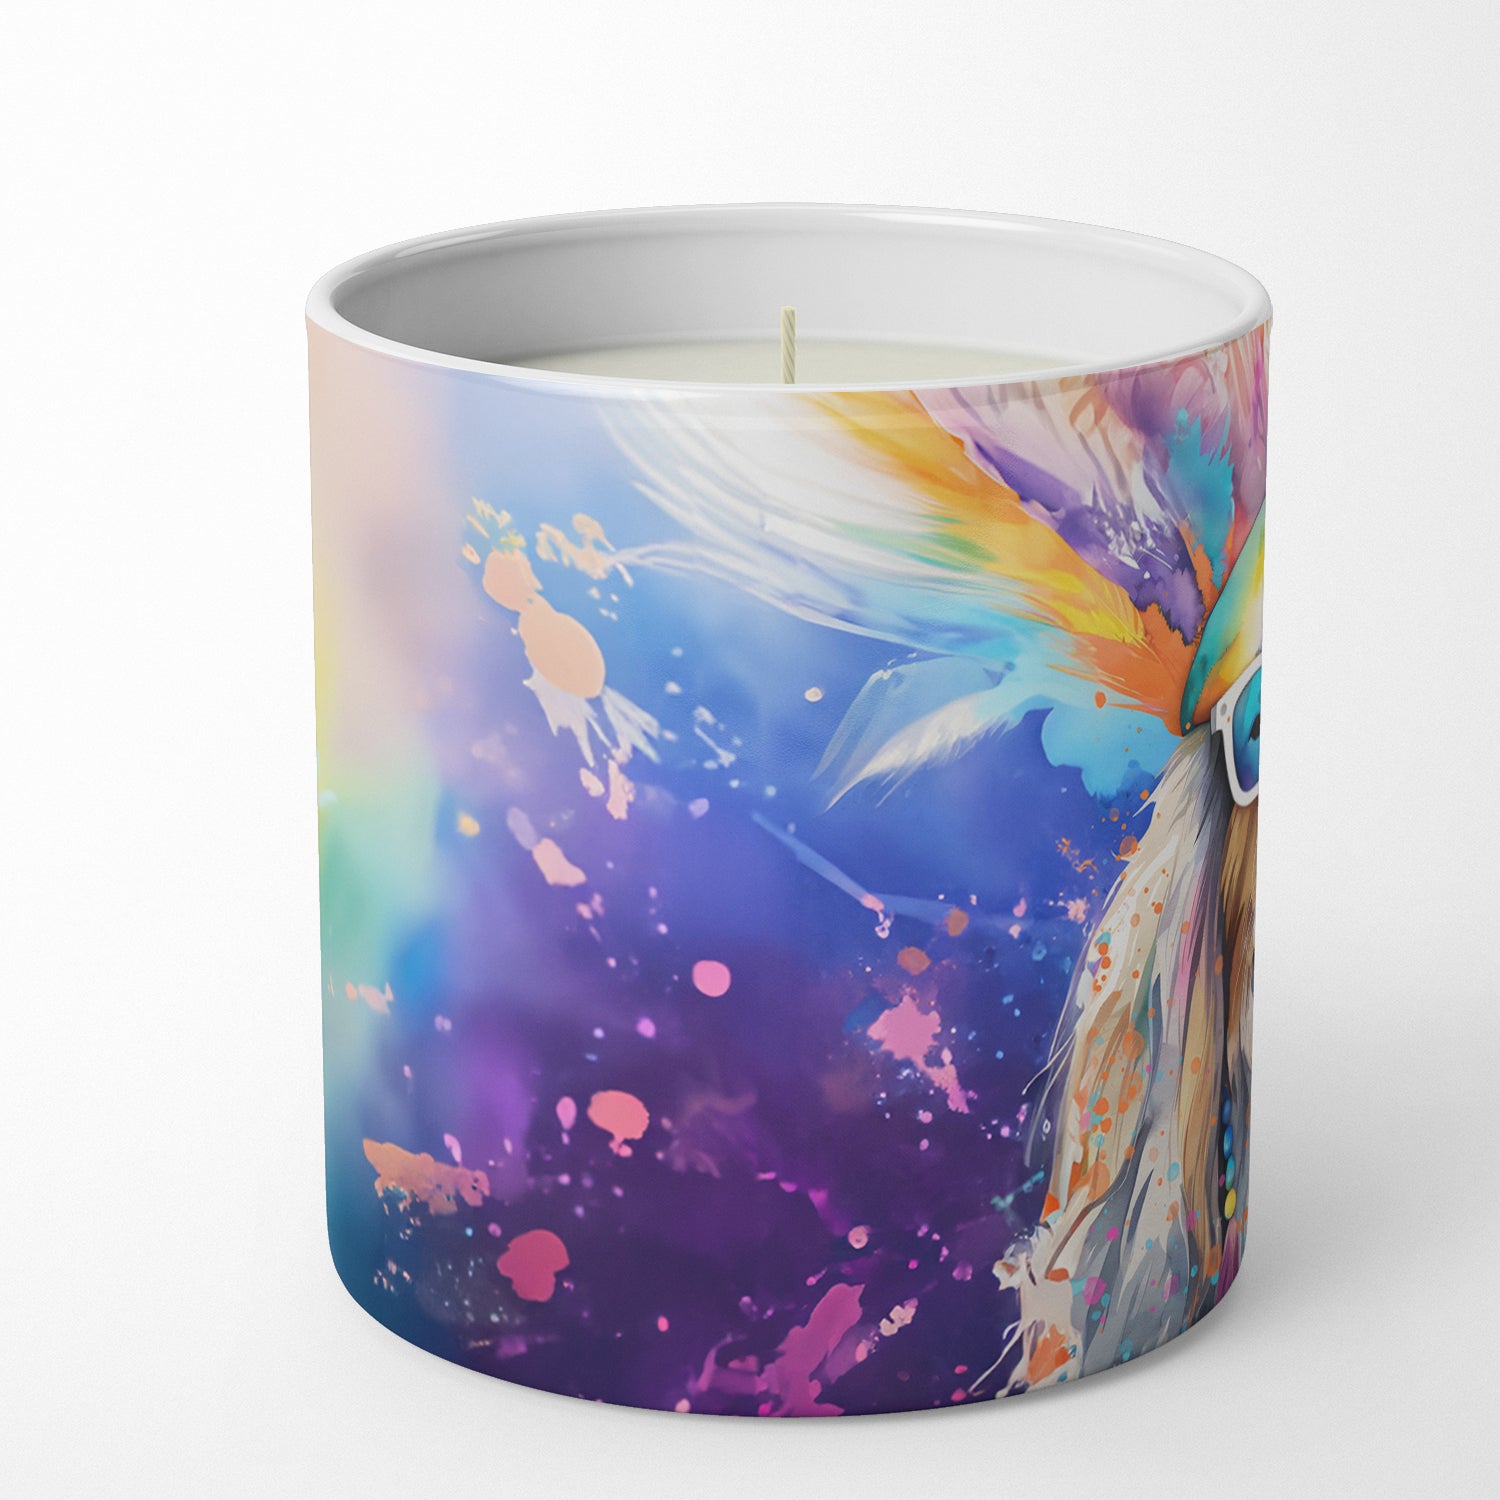 Bearded Collie Hippie Dawg Decorative Soy Candle